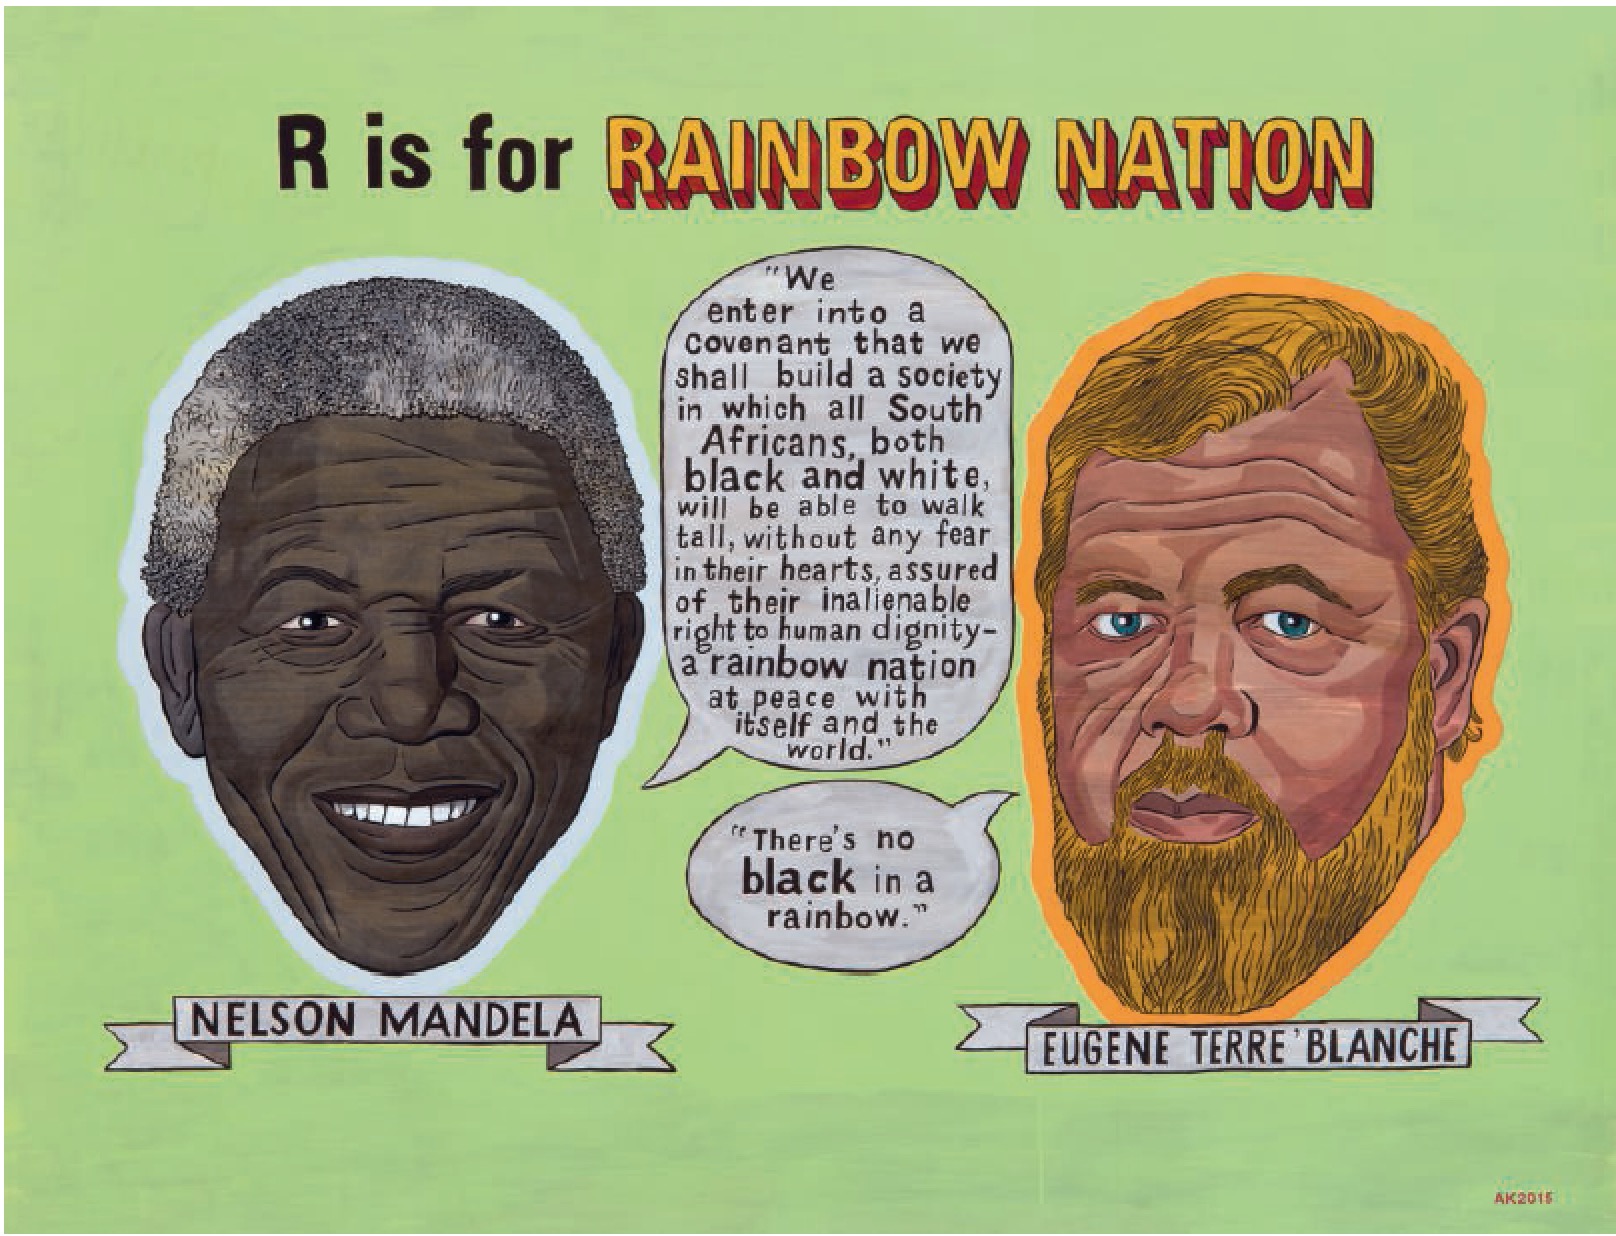 Anton Kannemeyer - R is for Rainbow Nation from the series ‘Alphabet of Democracy’,